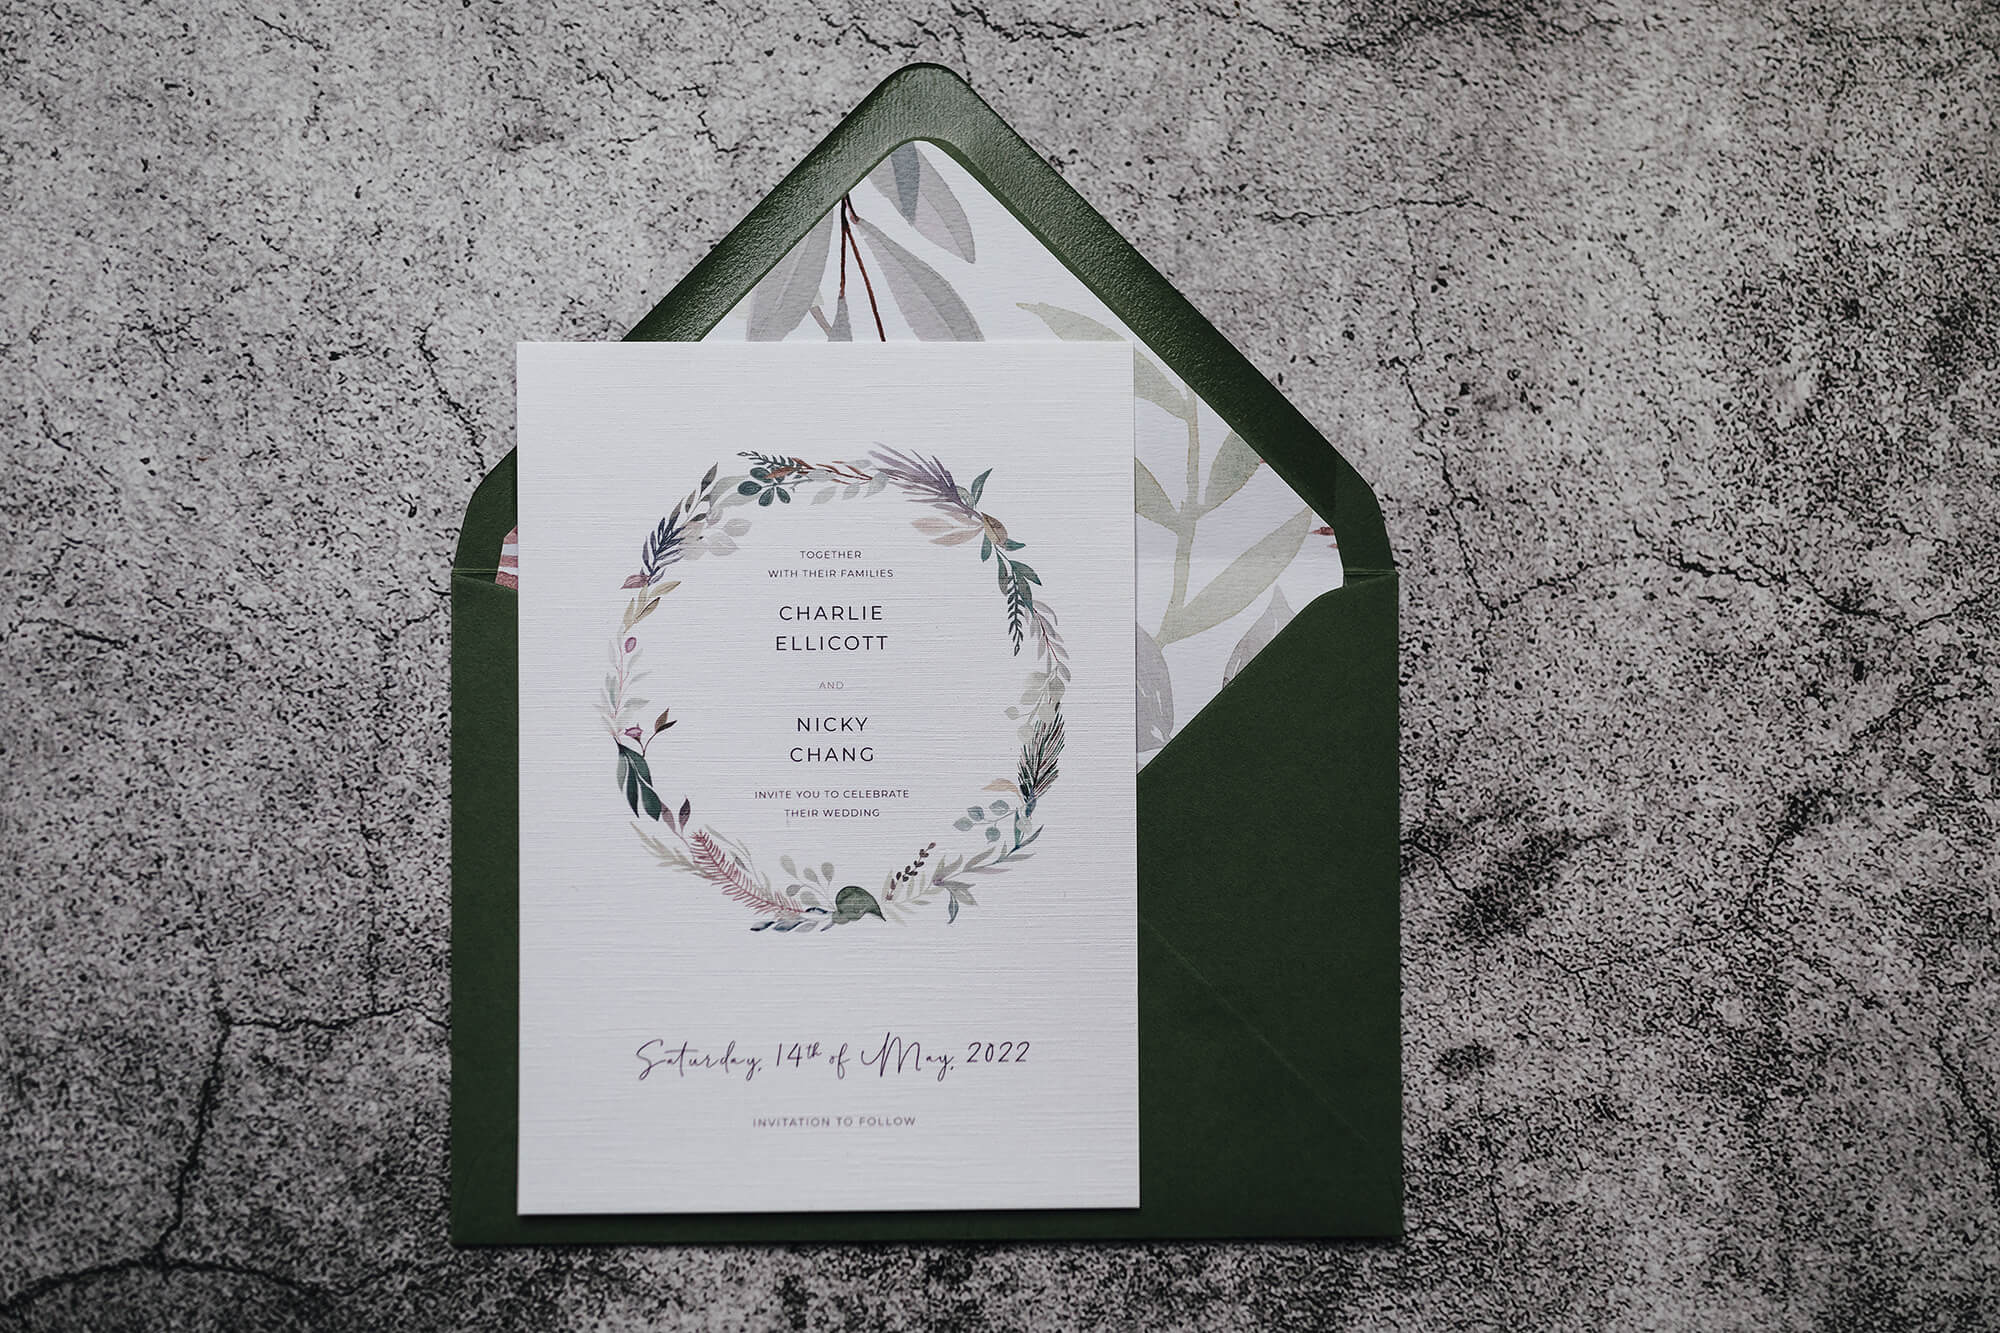 Rustic, vintage save the date